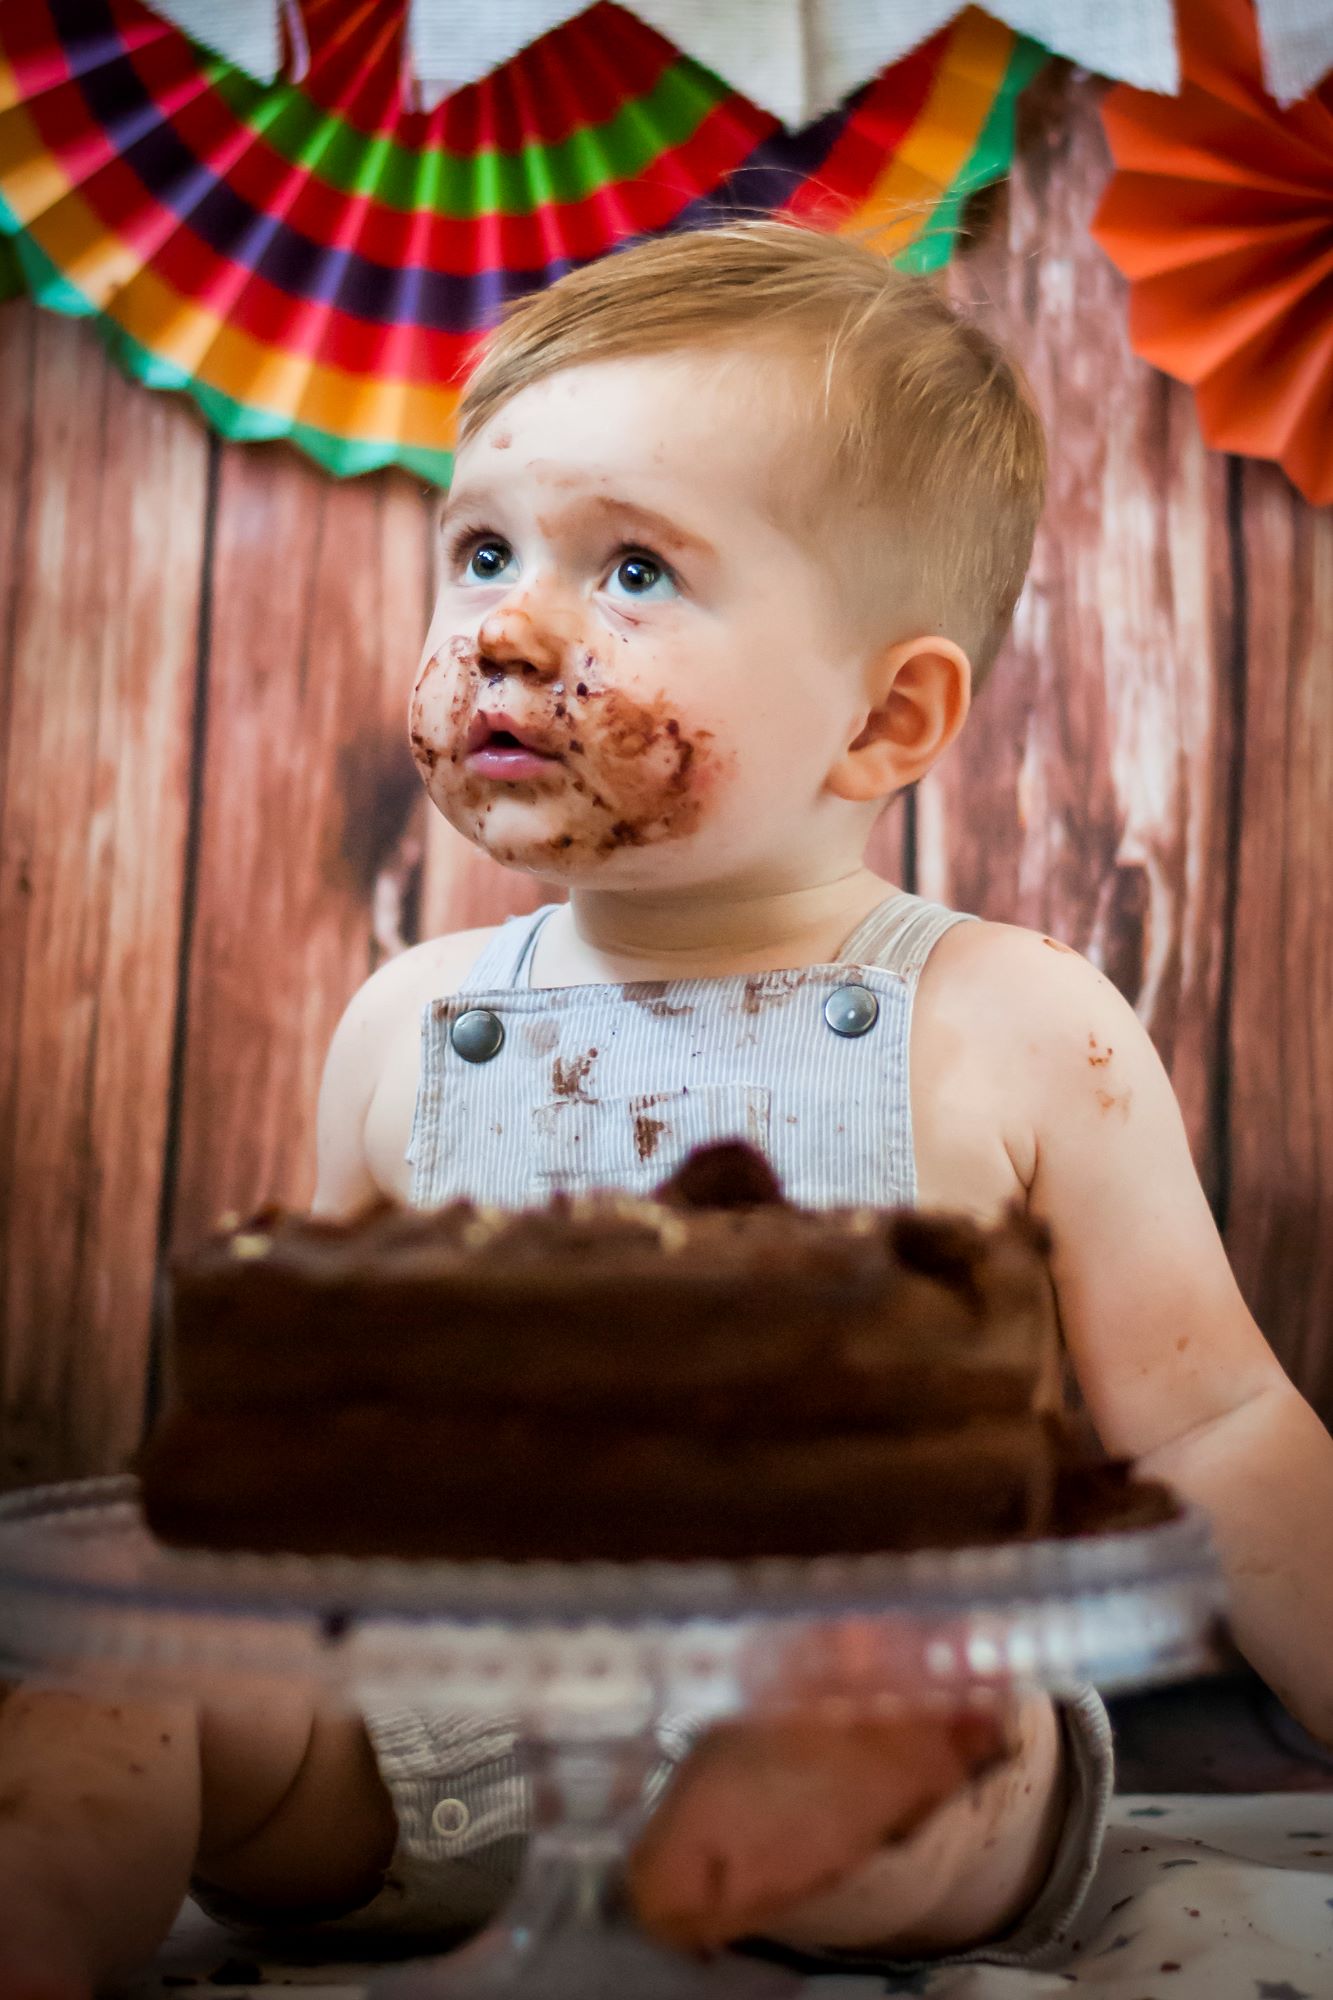 A little boy sits behind his chocolate cake and looks up at his mum and dad. He's got chocolate all over his face